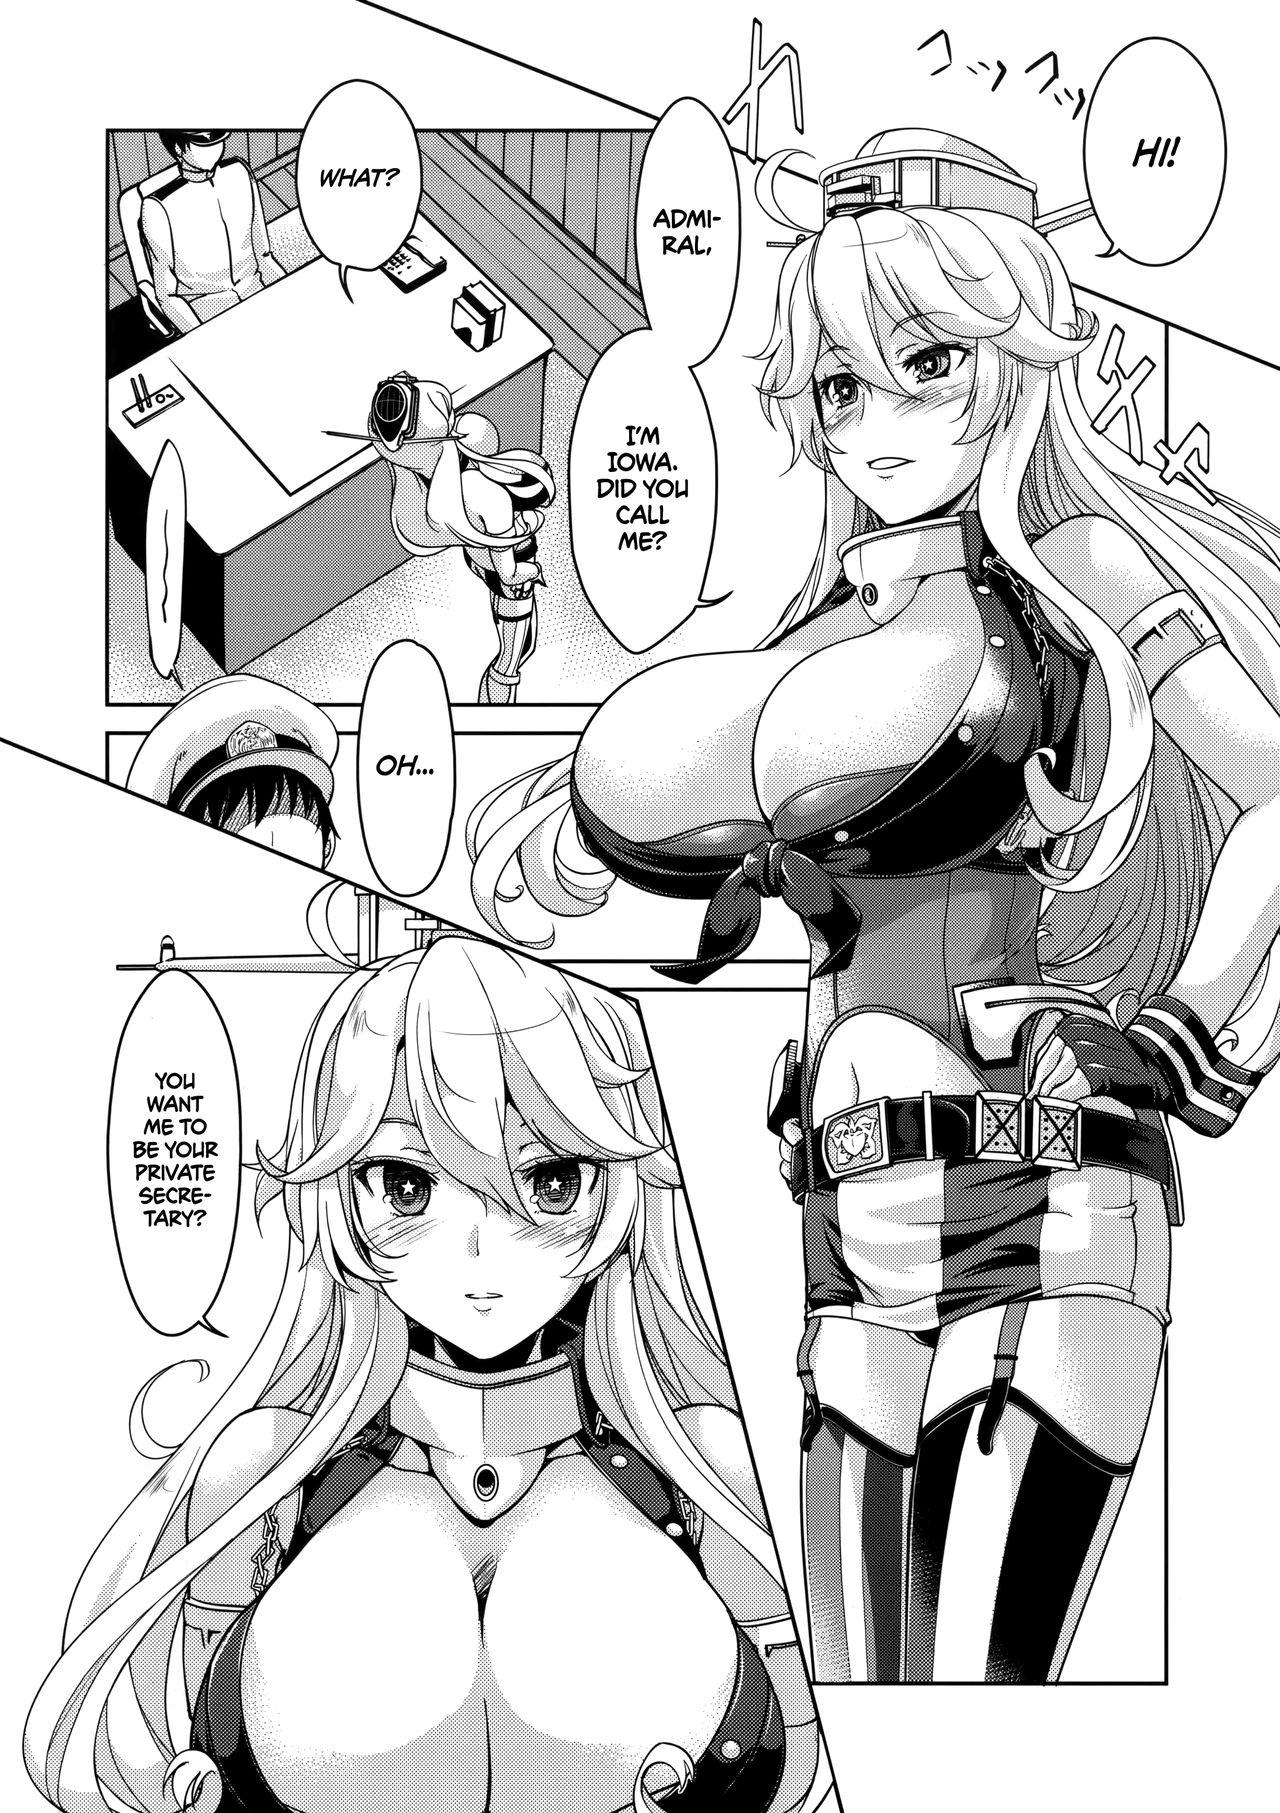 Milf I owant you! - Kantai collection Big - Page 3